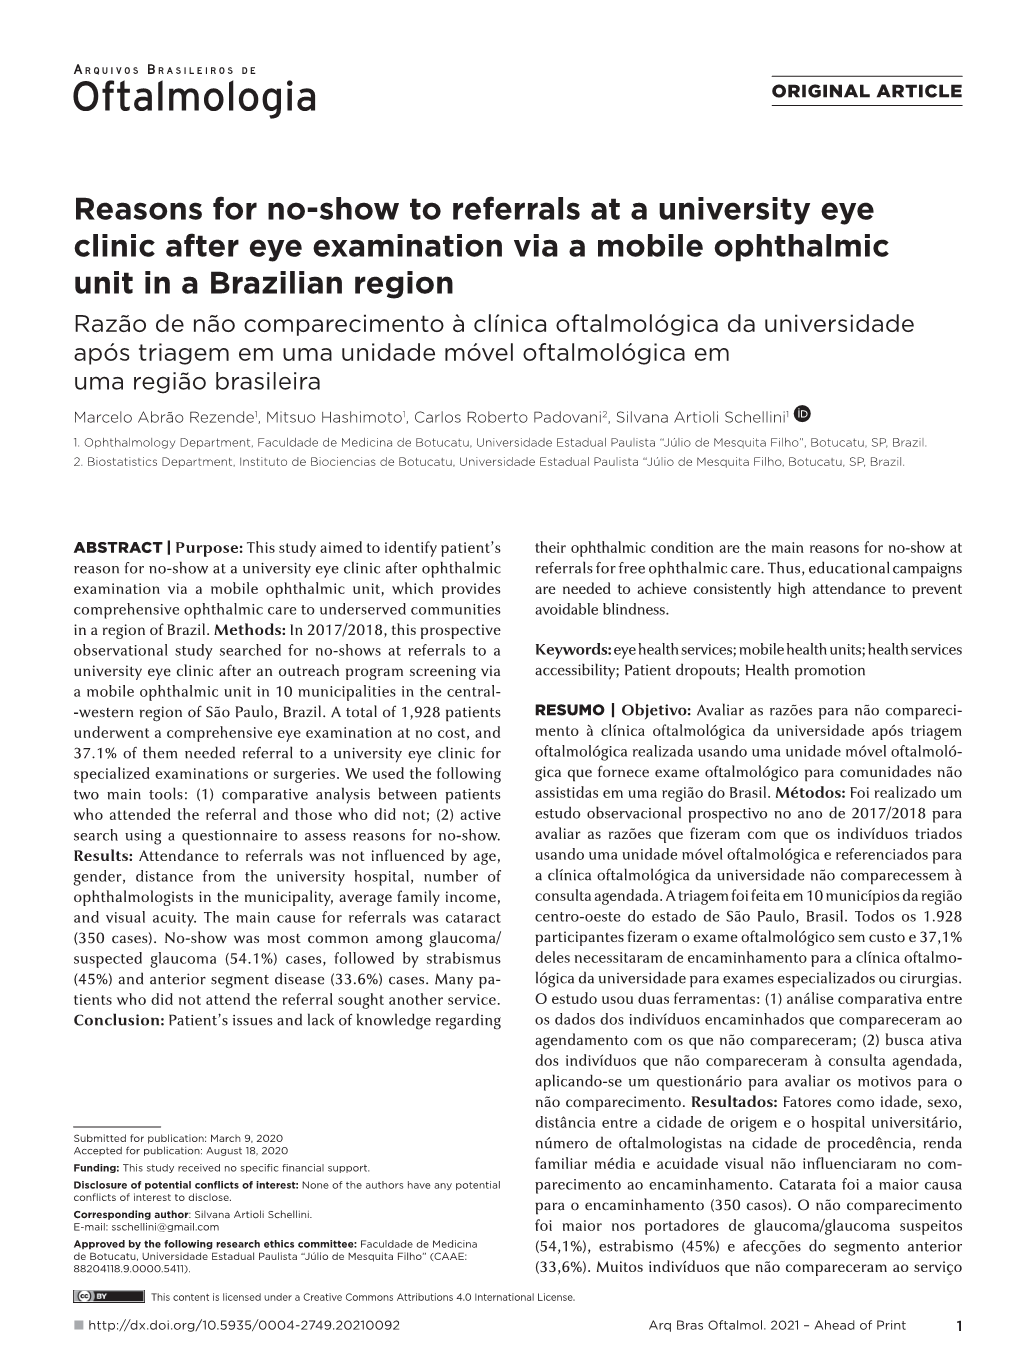 Reasons for No-Show to Referrals at a University Eye Clinic After Eye